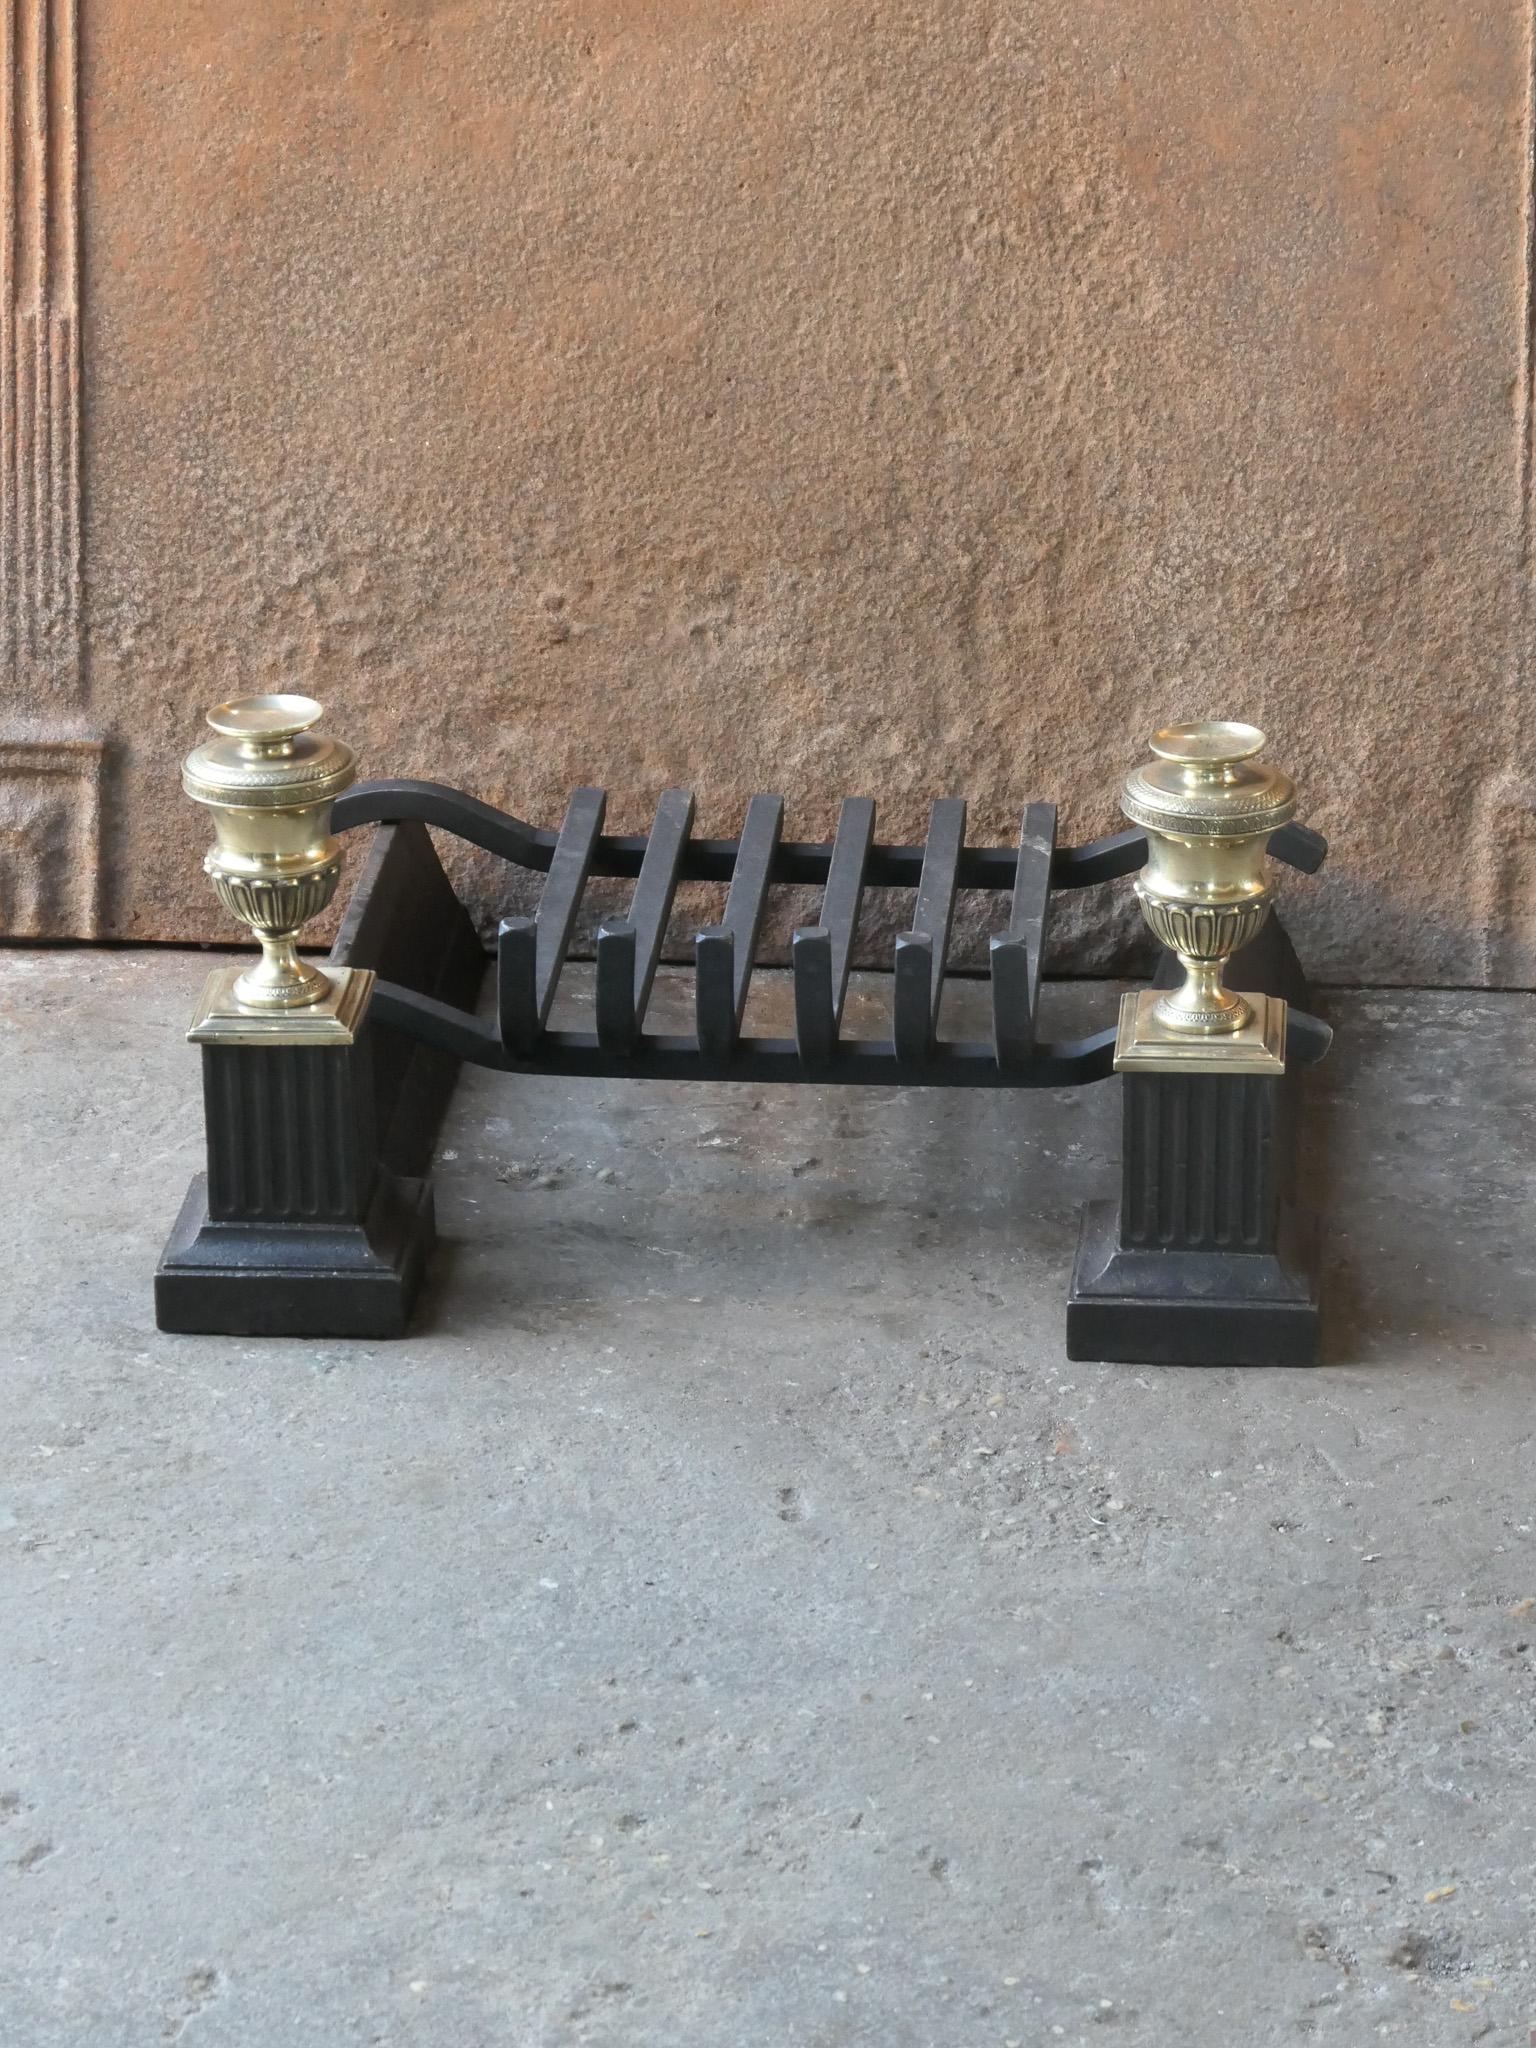 19th century French Napoleon III fireplace grate, made of cast iron, wrought iron and polished brass. The basket is in a good condition and is fully functional.

